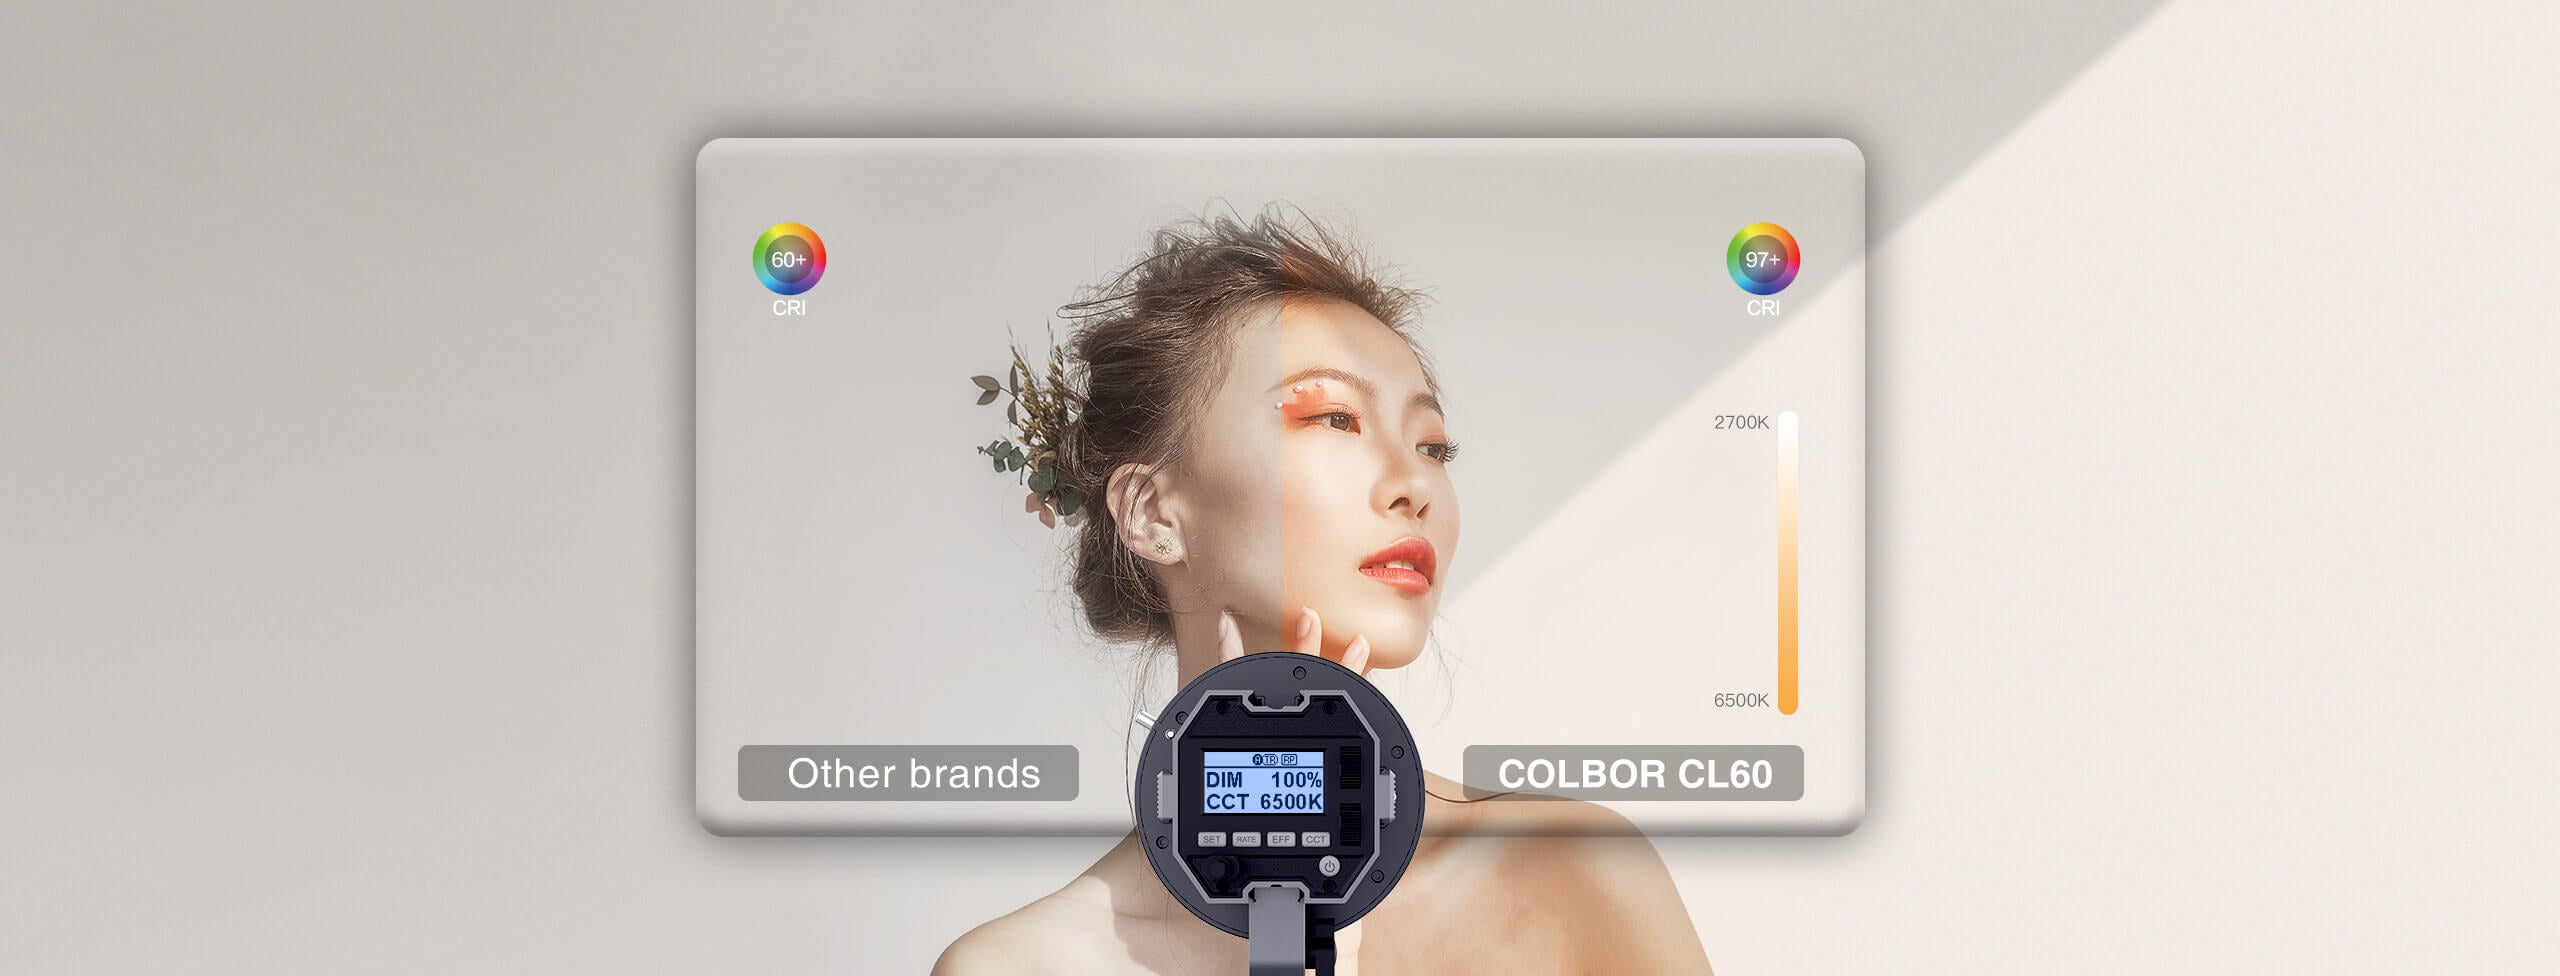 COLBOR CL60 reveals the color of objects authentically with a high CRI of 97+ and bi-color temperature.